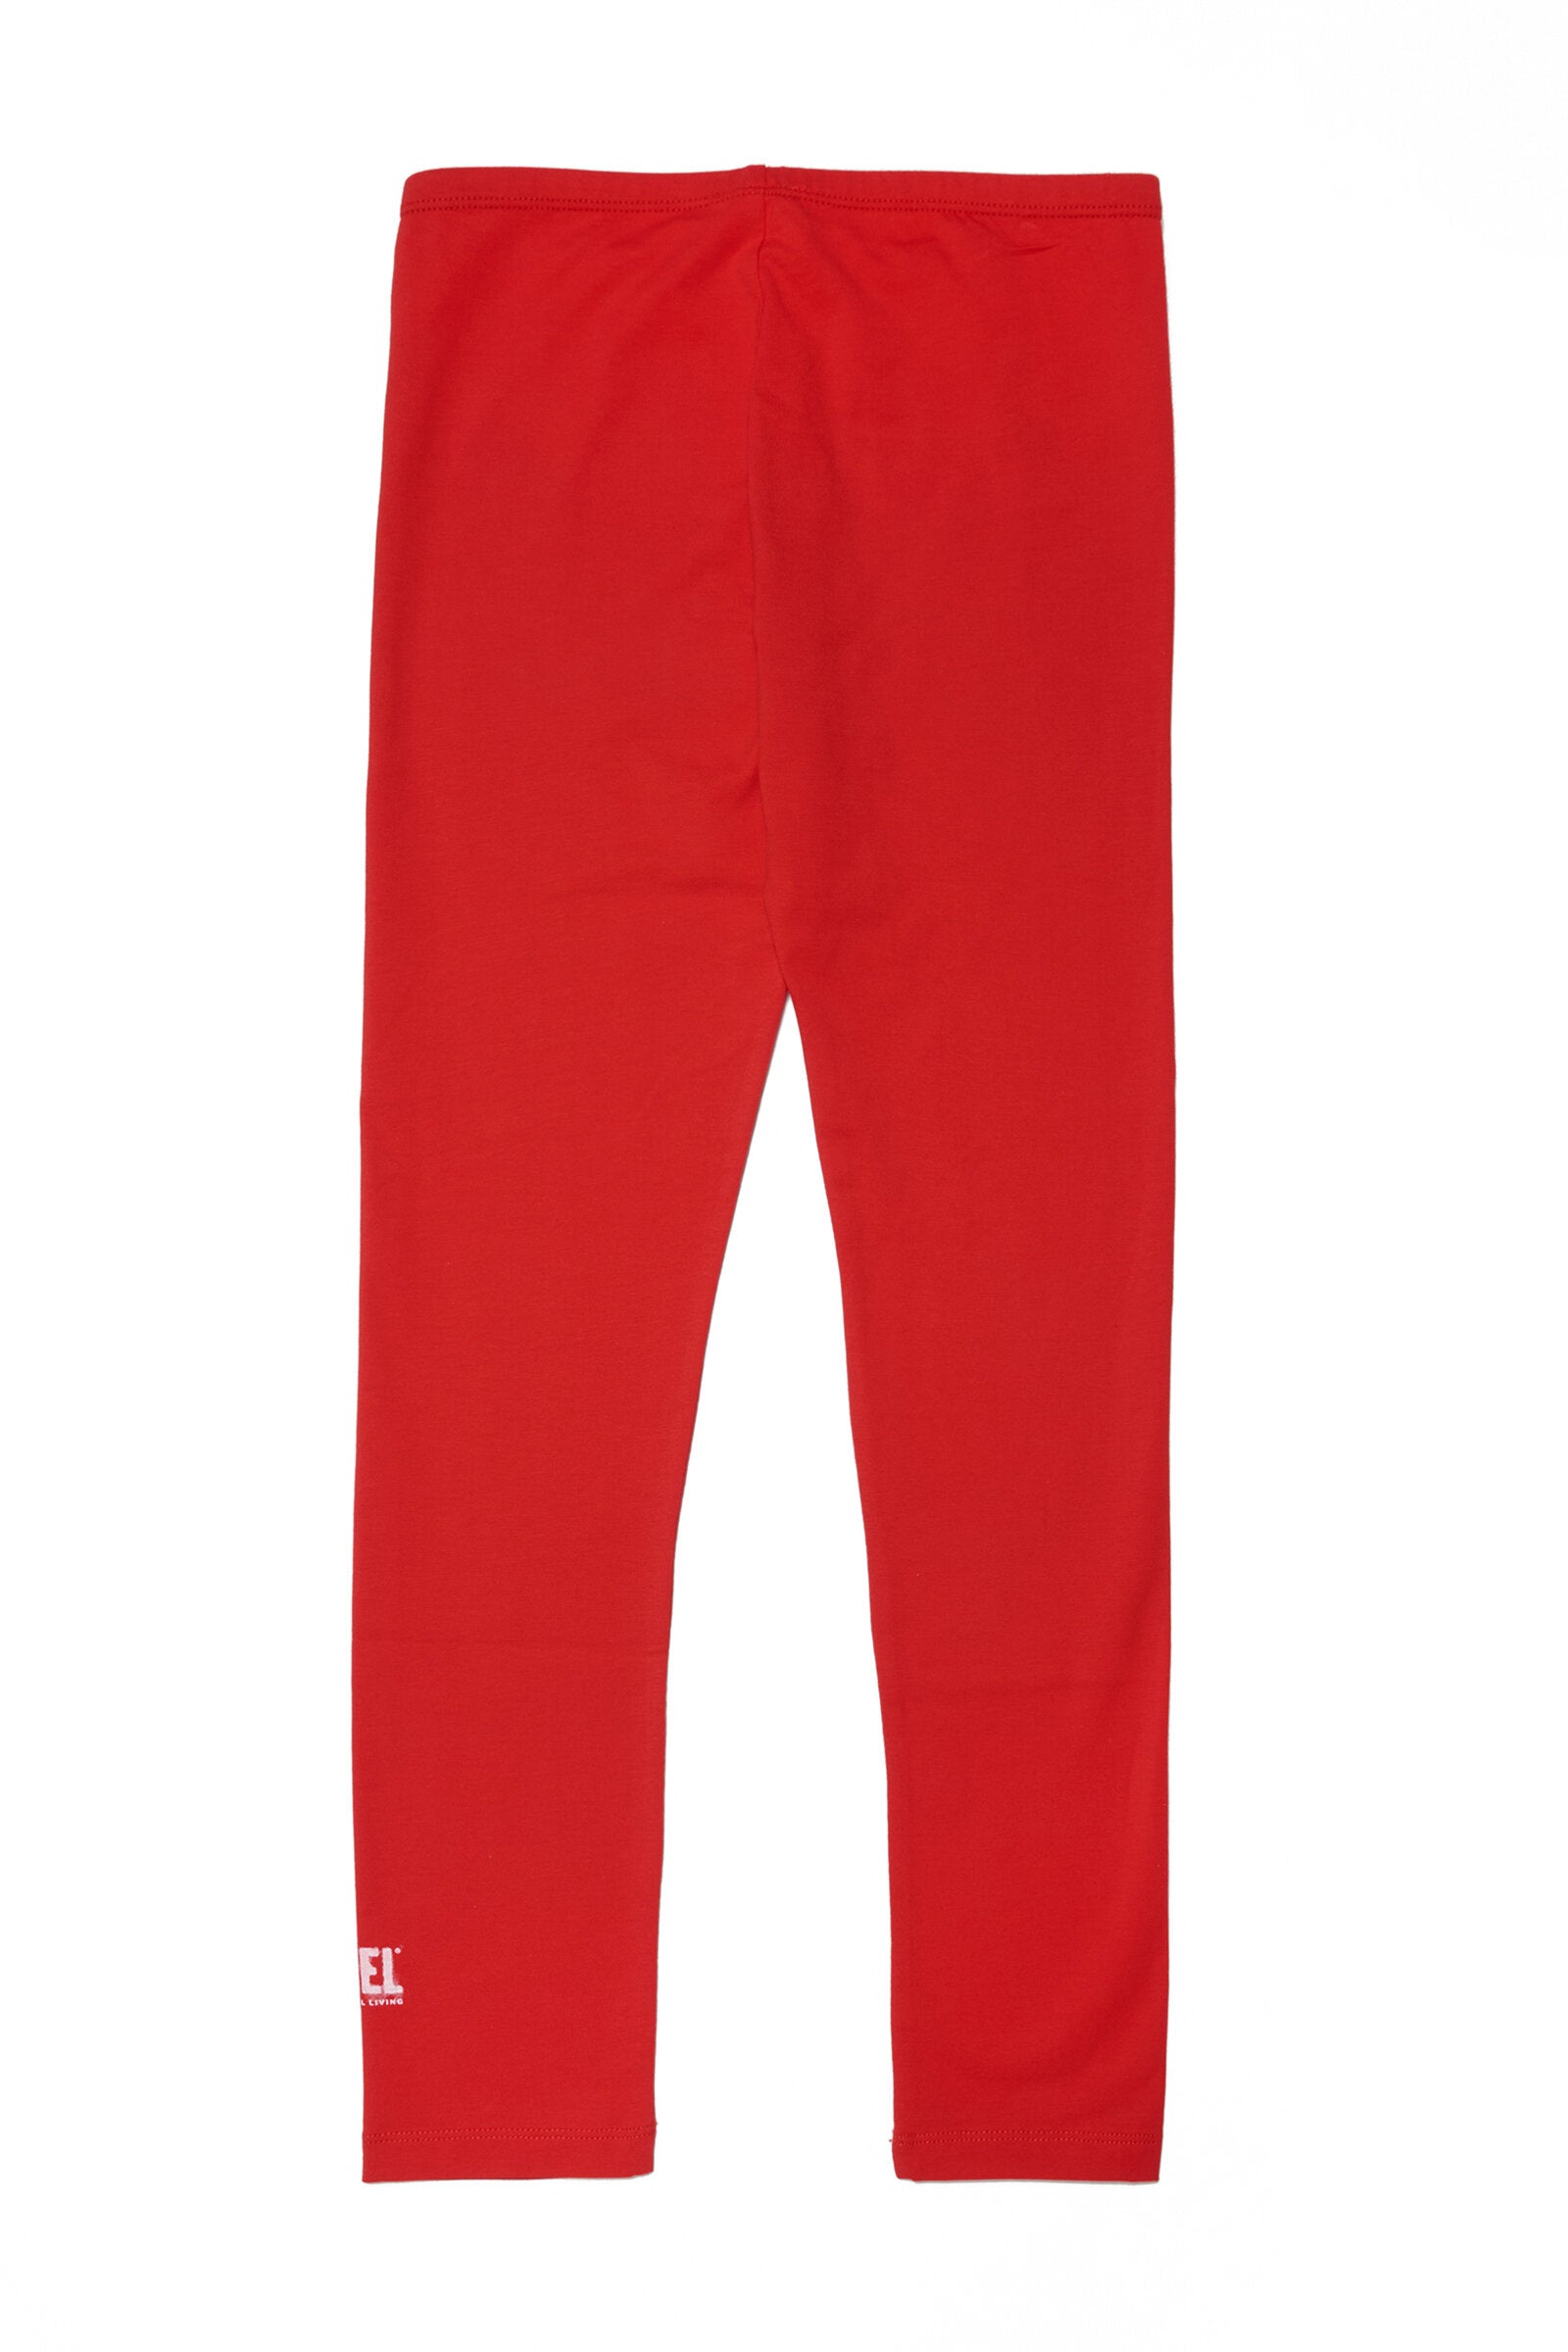 Red leggings pants with logo at ankle